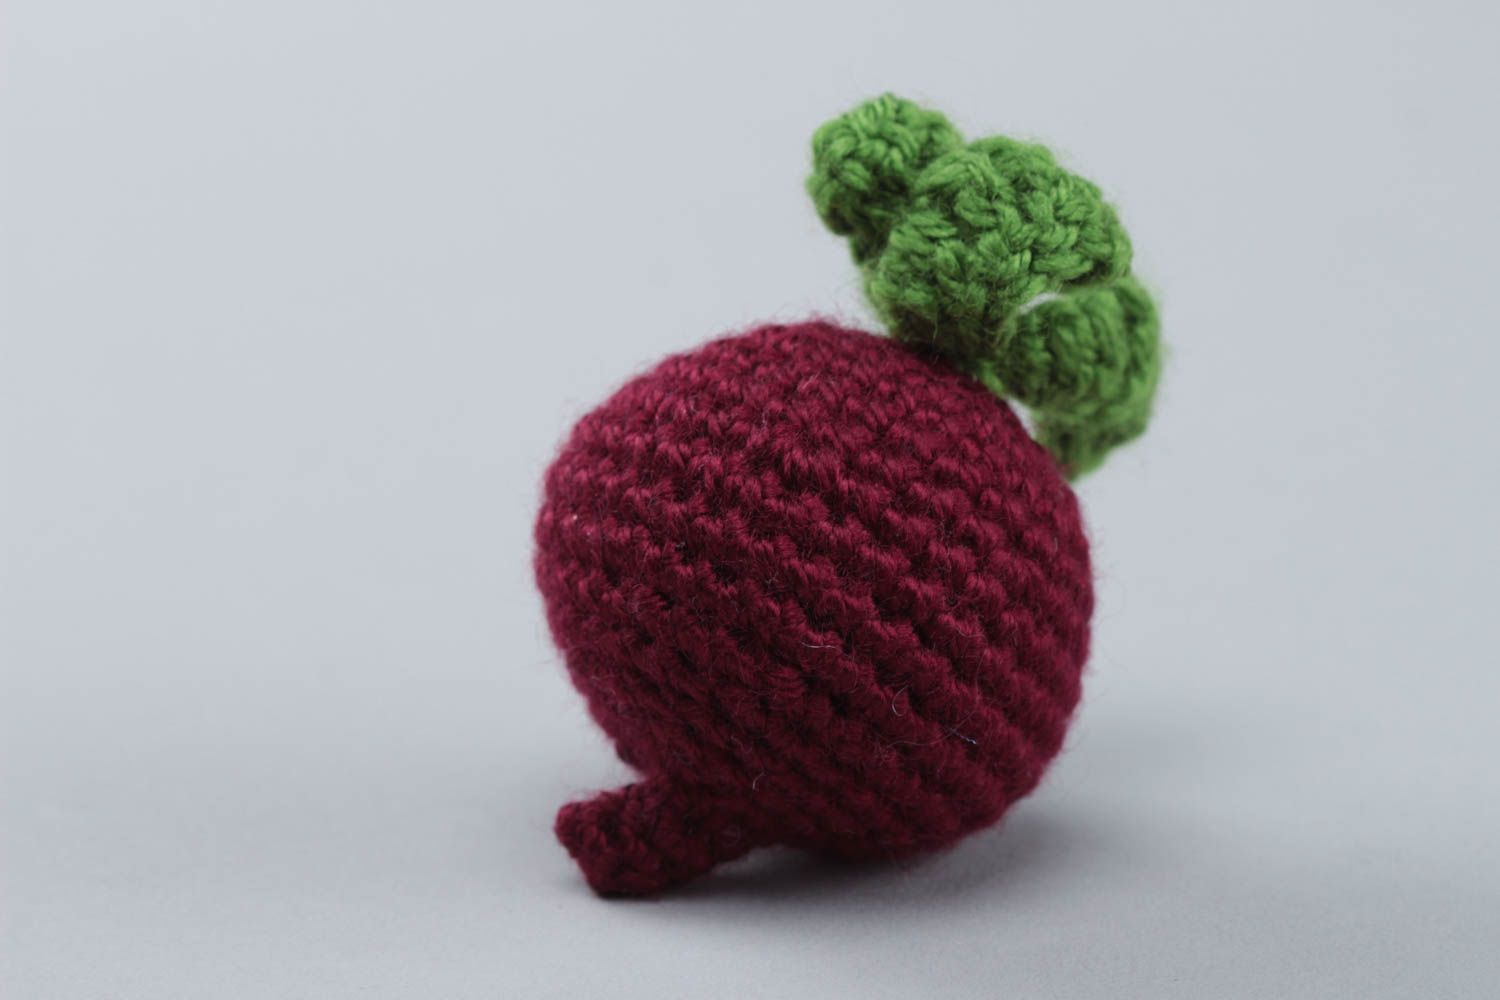 Handmade small acrylic crochet soft toy vegetable beet for kids and decor photo 4